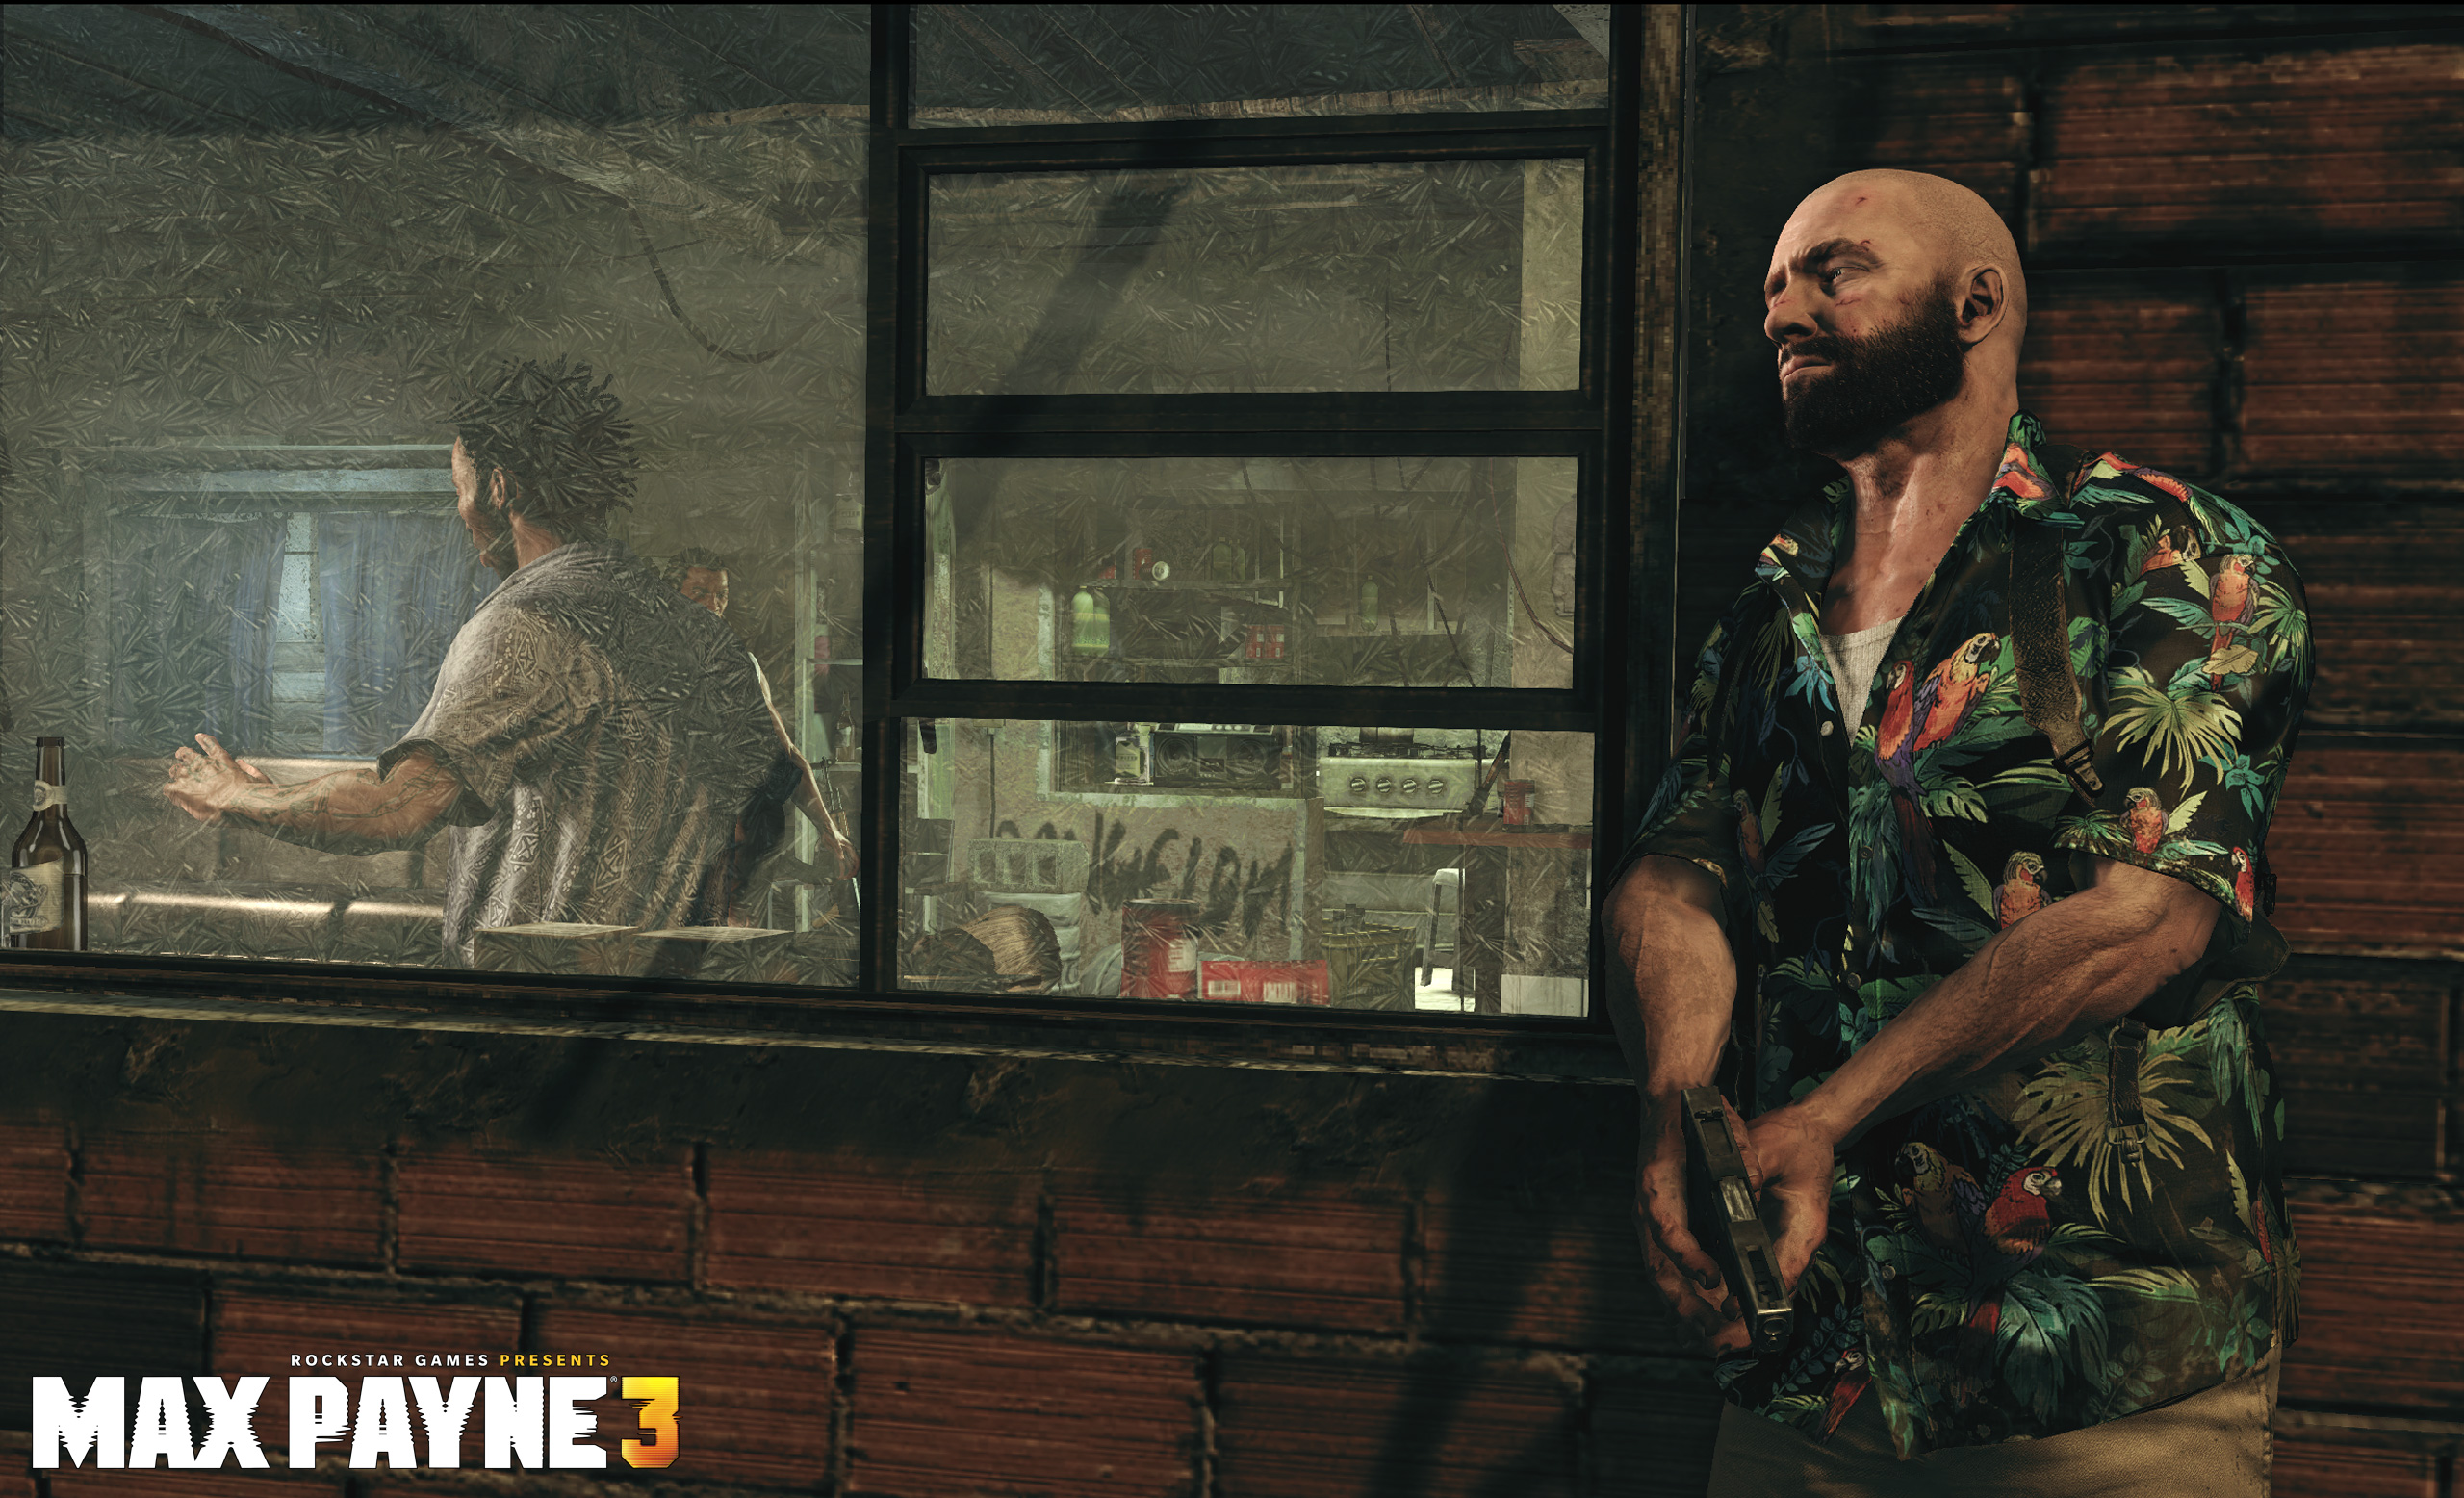 max-payne-3-for-pc-new-screens-and-details-including-system-specs-and-digital-pre-order-info